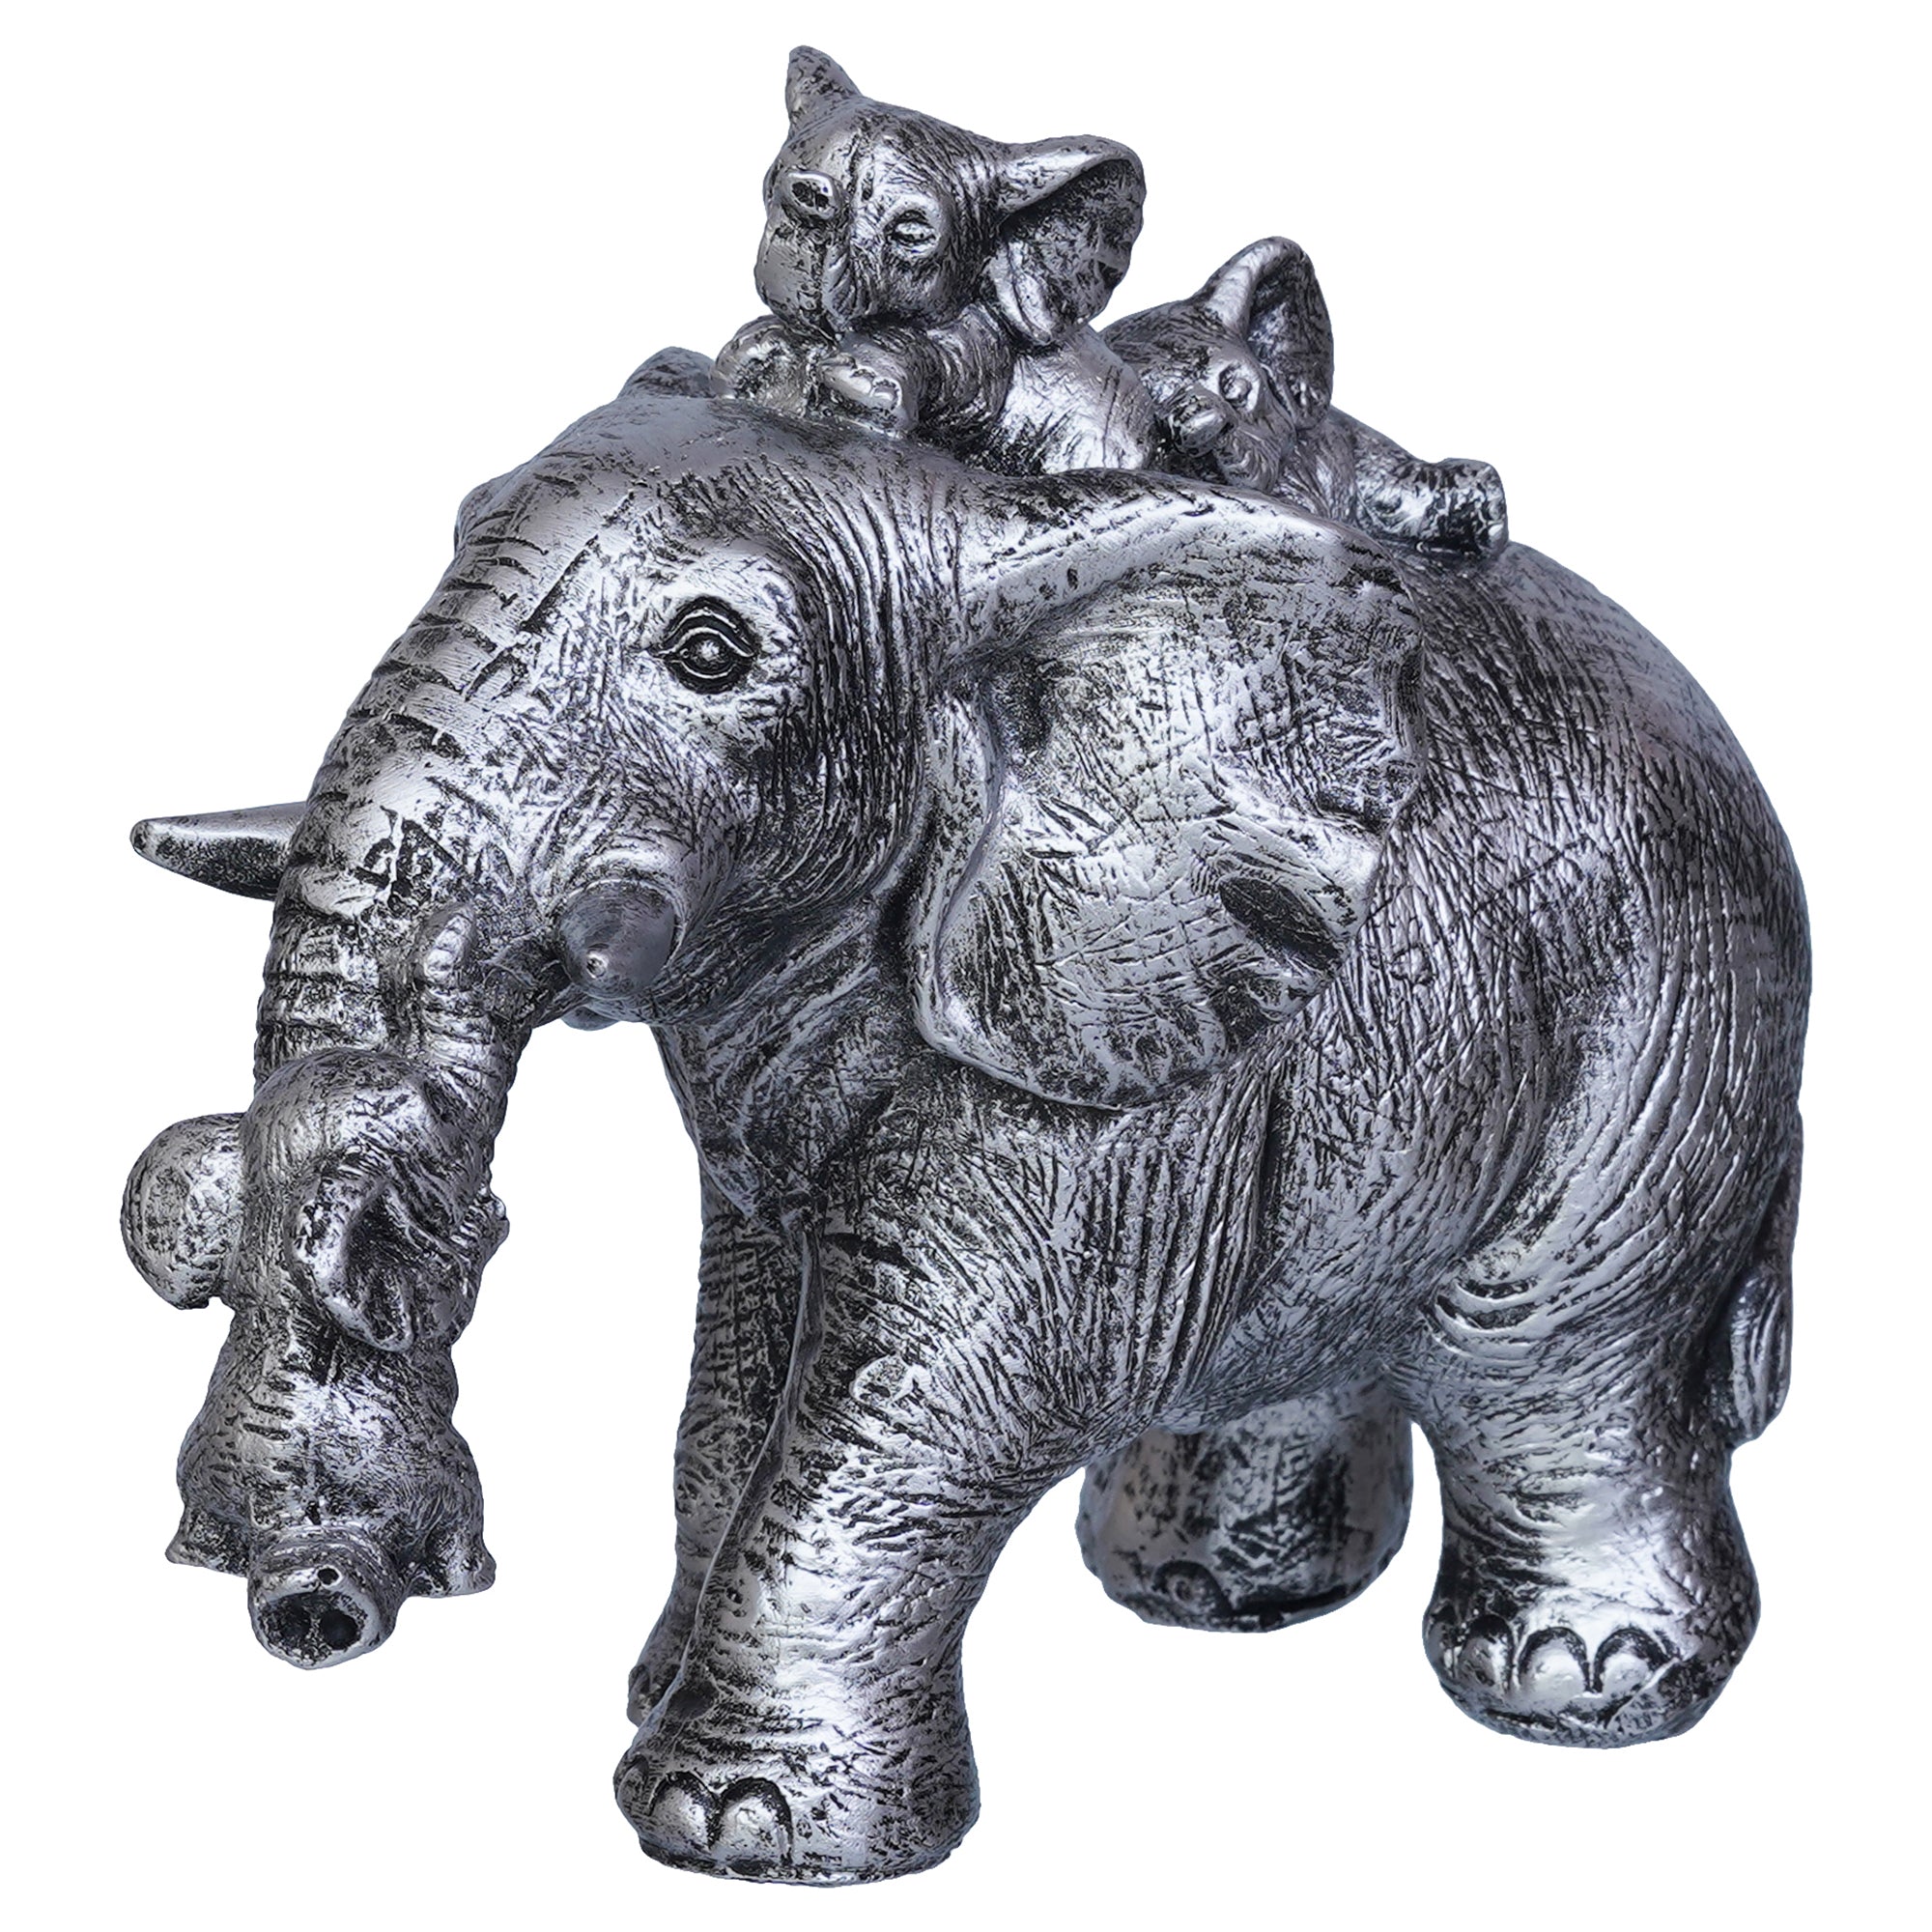 Cute Silver Elephant Statue Carries Three Calves on Its Back and Trunk 6